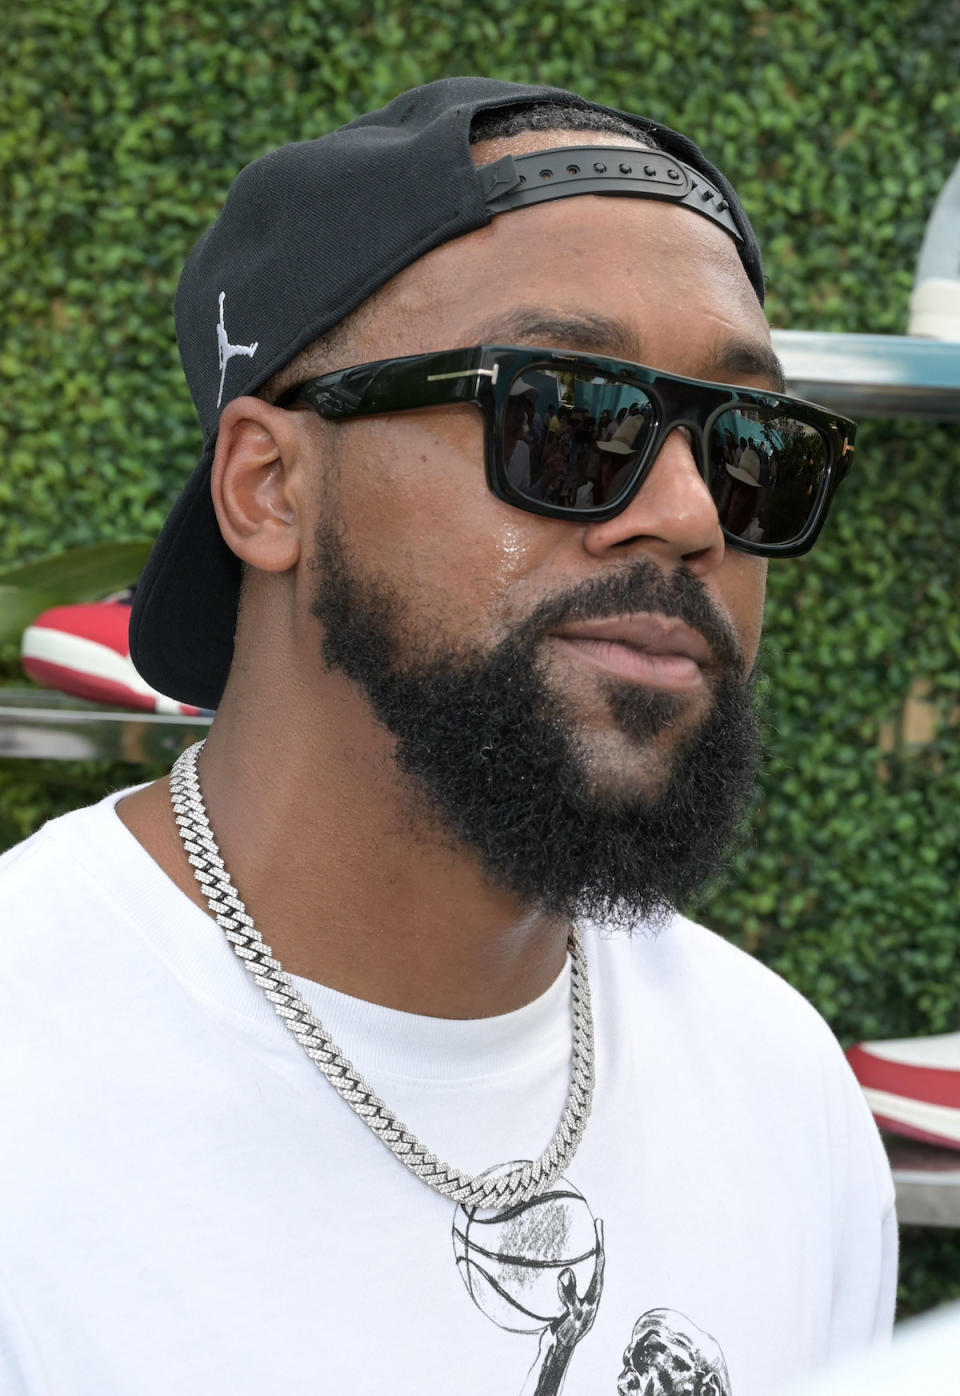 A close-up of Marcus walking outside. He's bearded and is wearing a basketball cap backwards and a chain